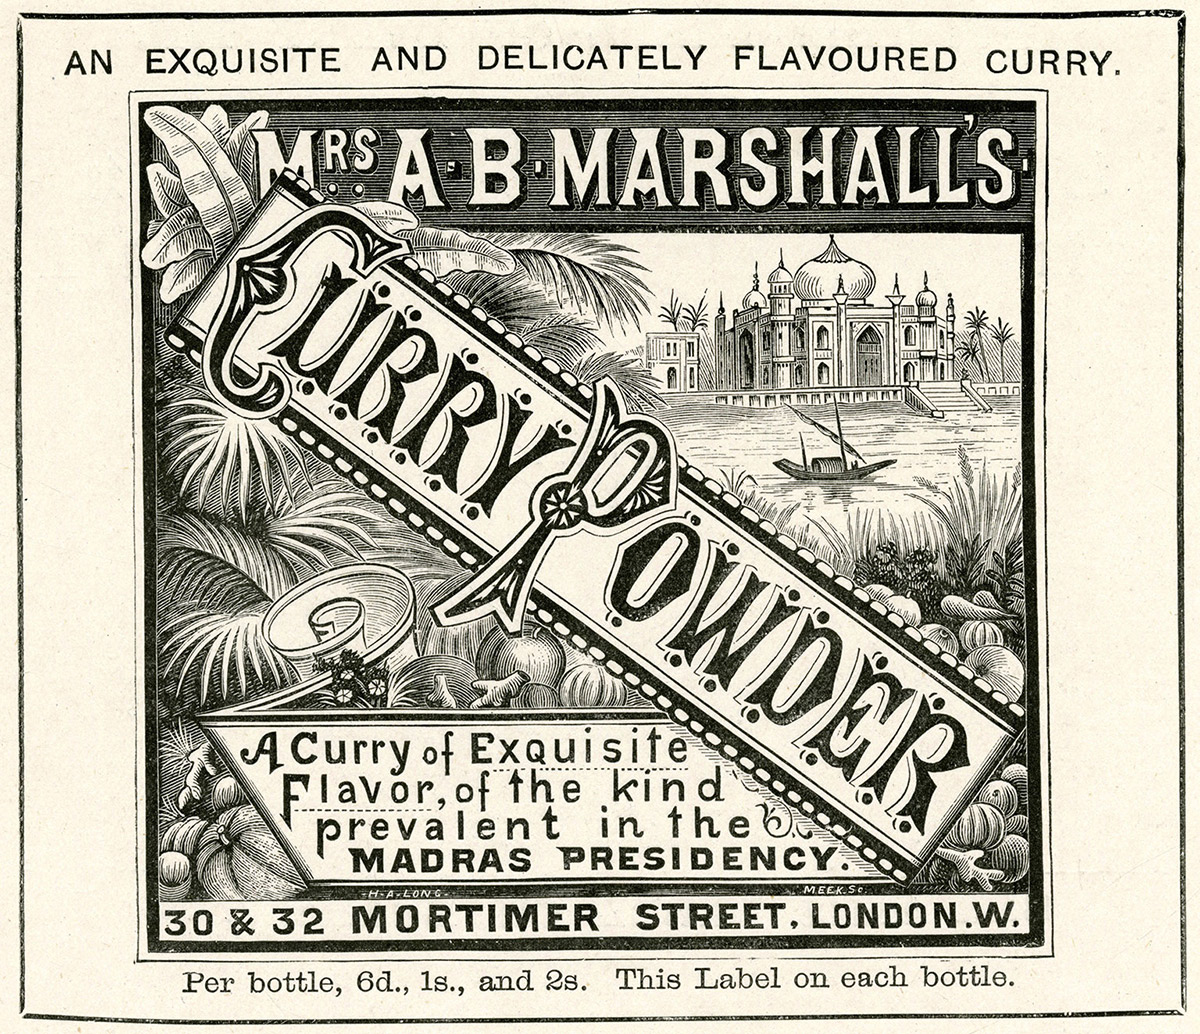 Advertisement for Marshall’s curry powder, 1899.